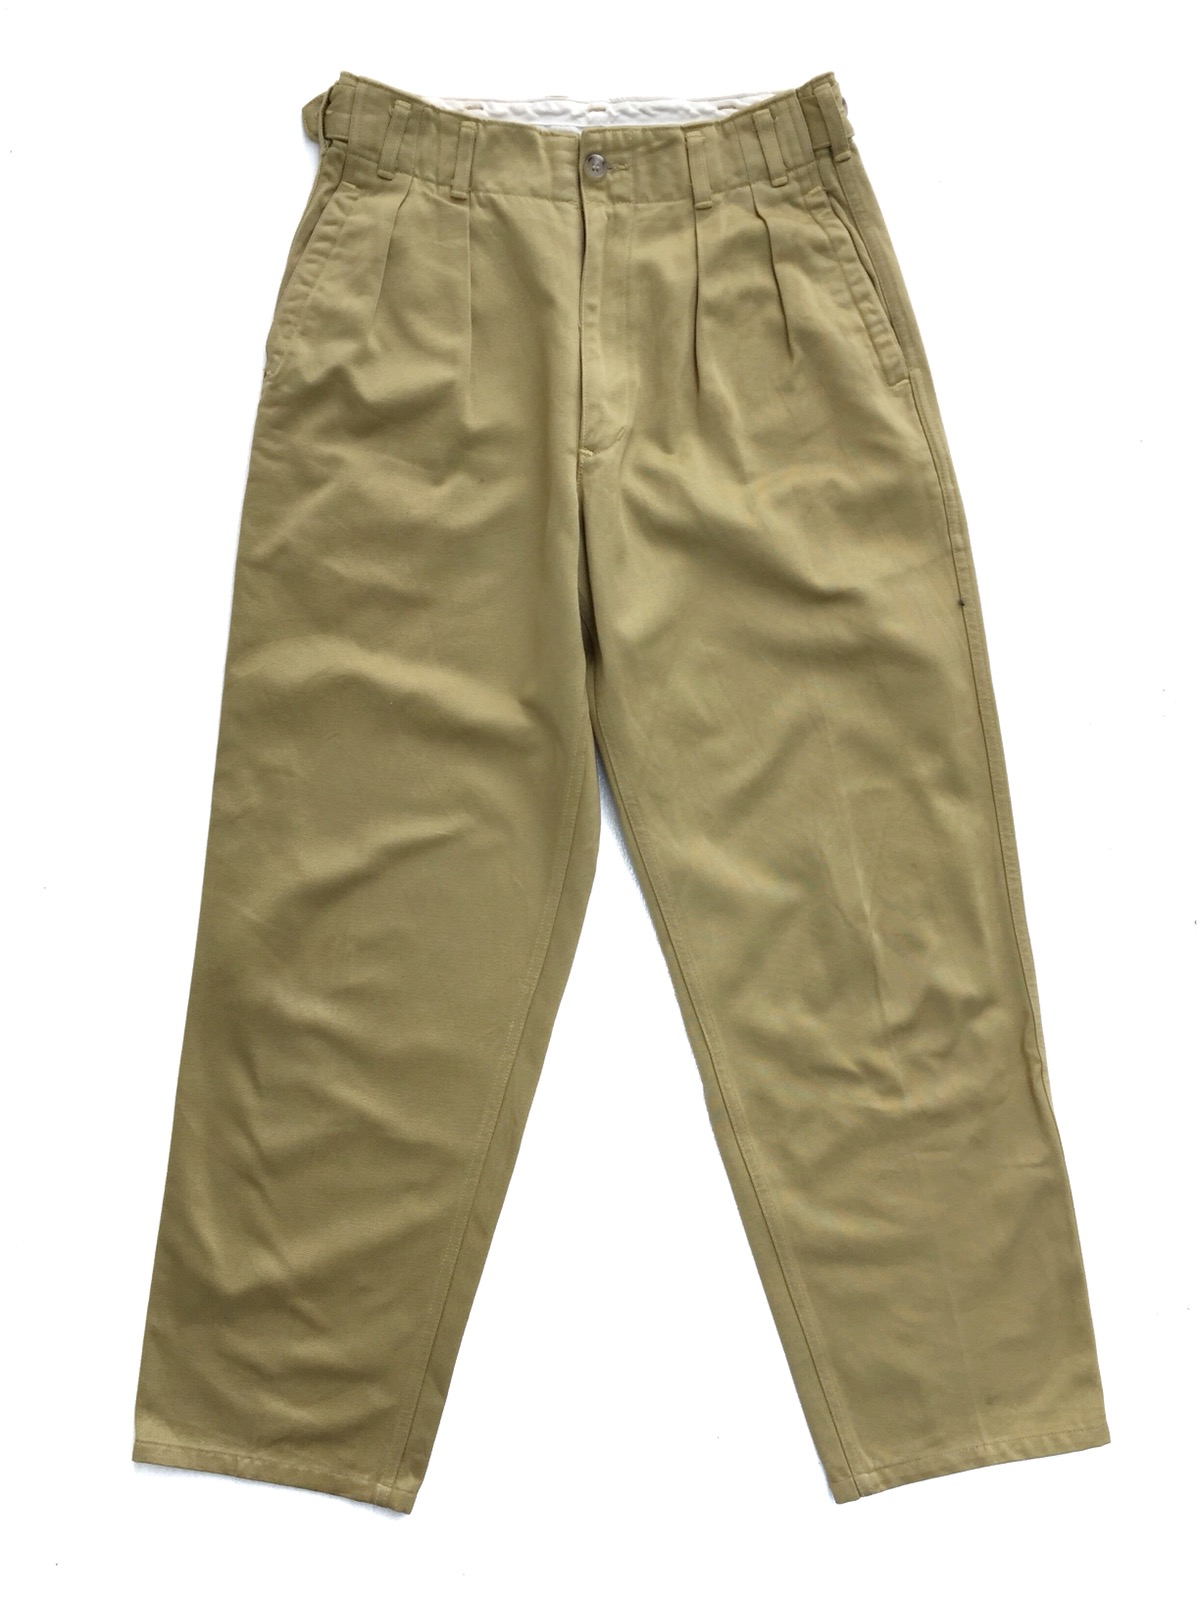 Nigel Cabourn Military Army Design Baggy Trousers Pants - 1